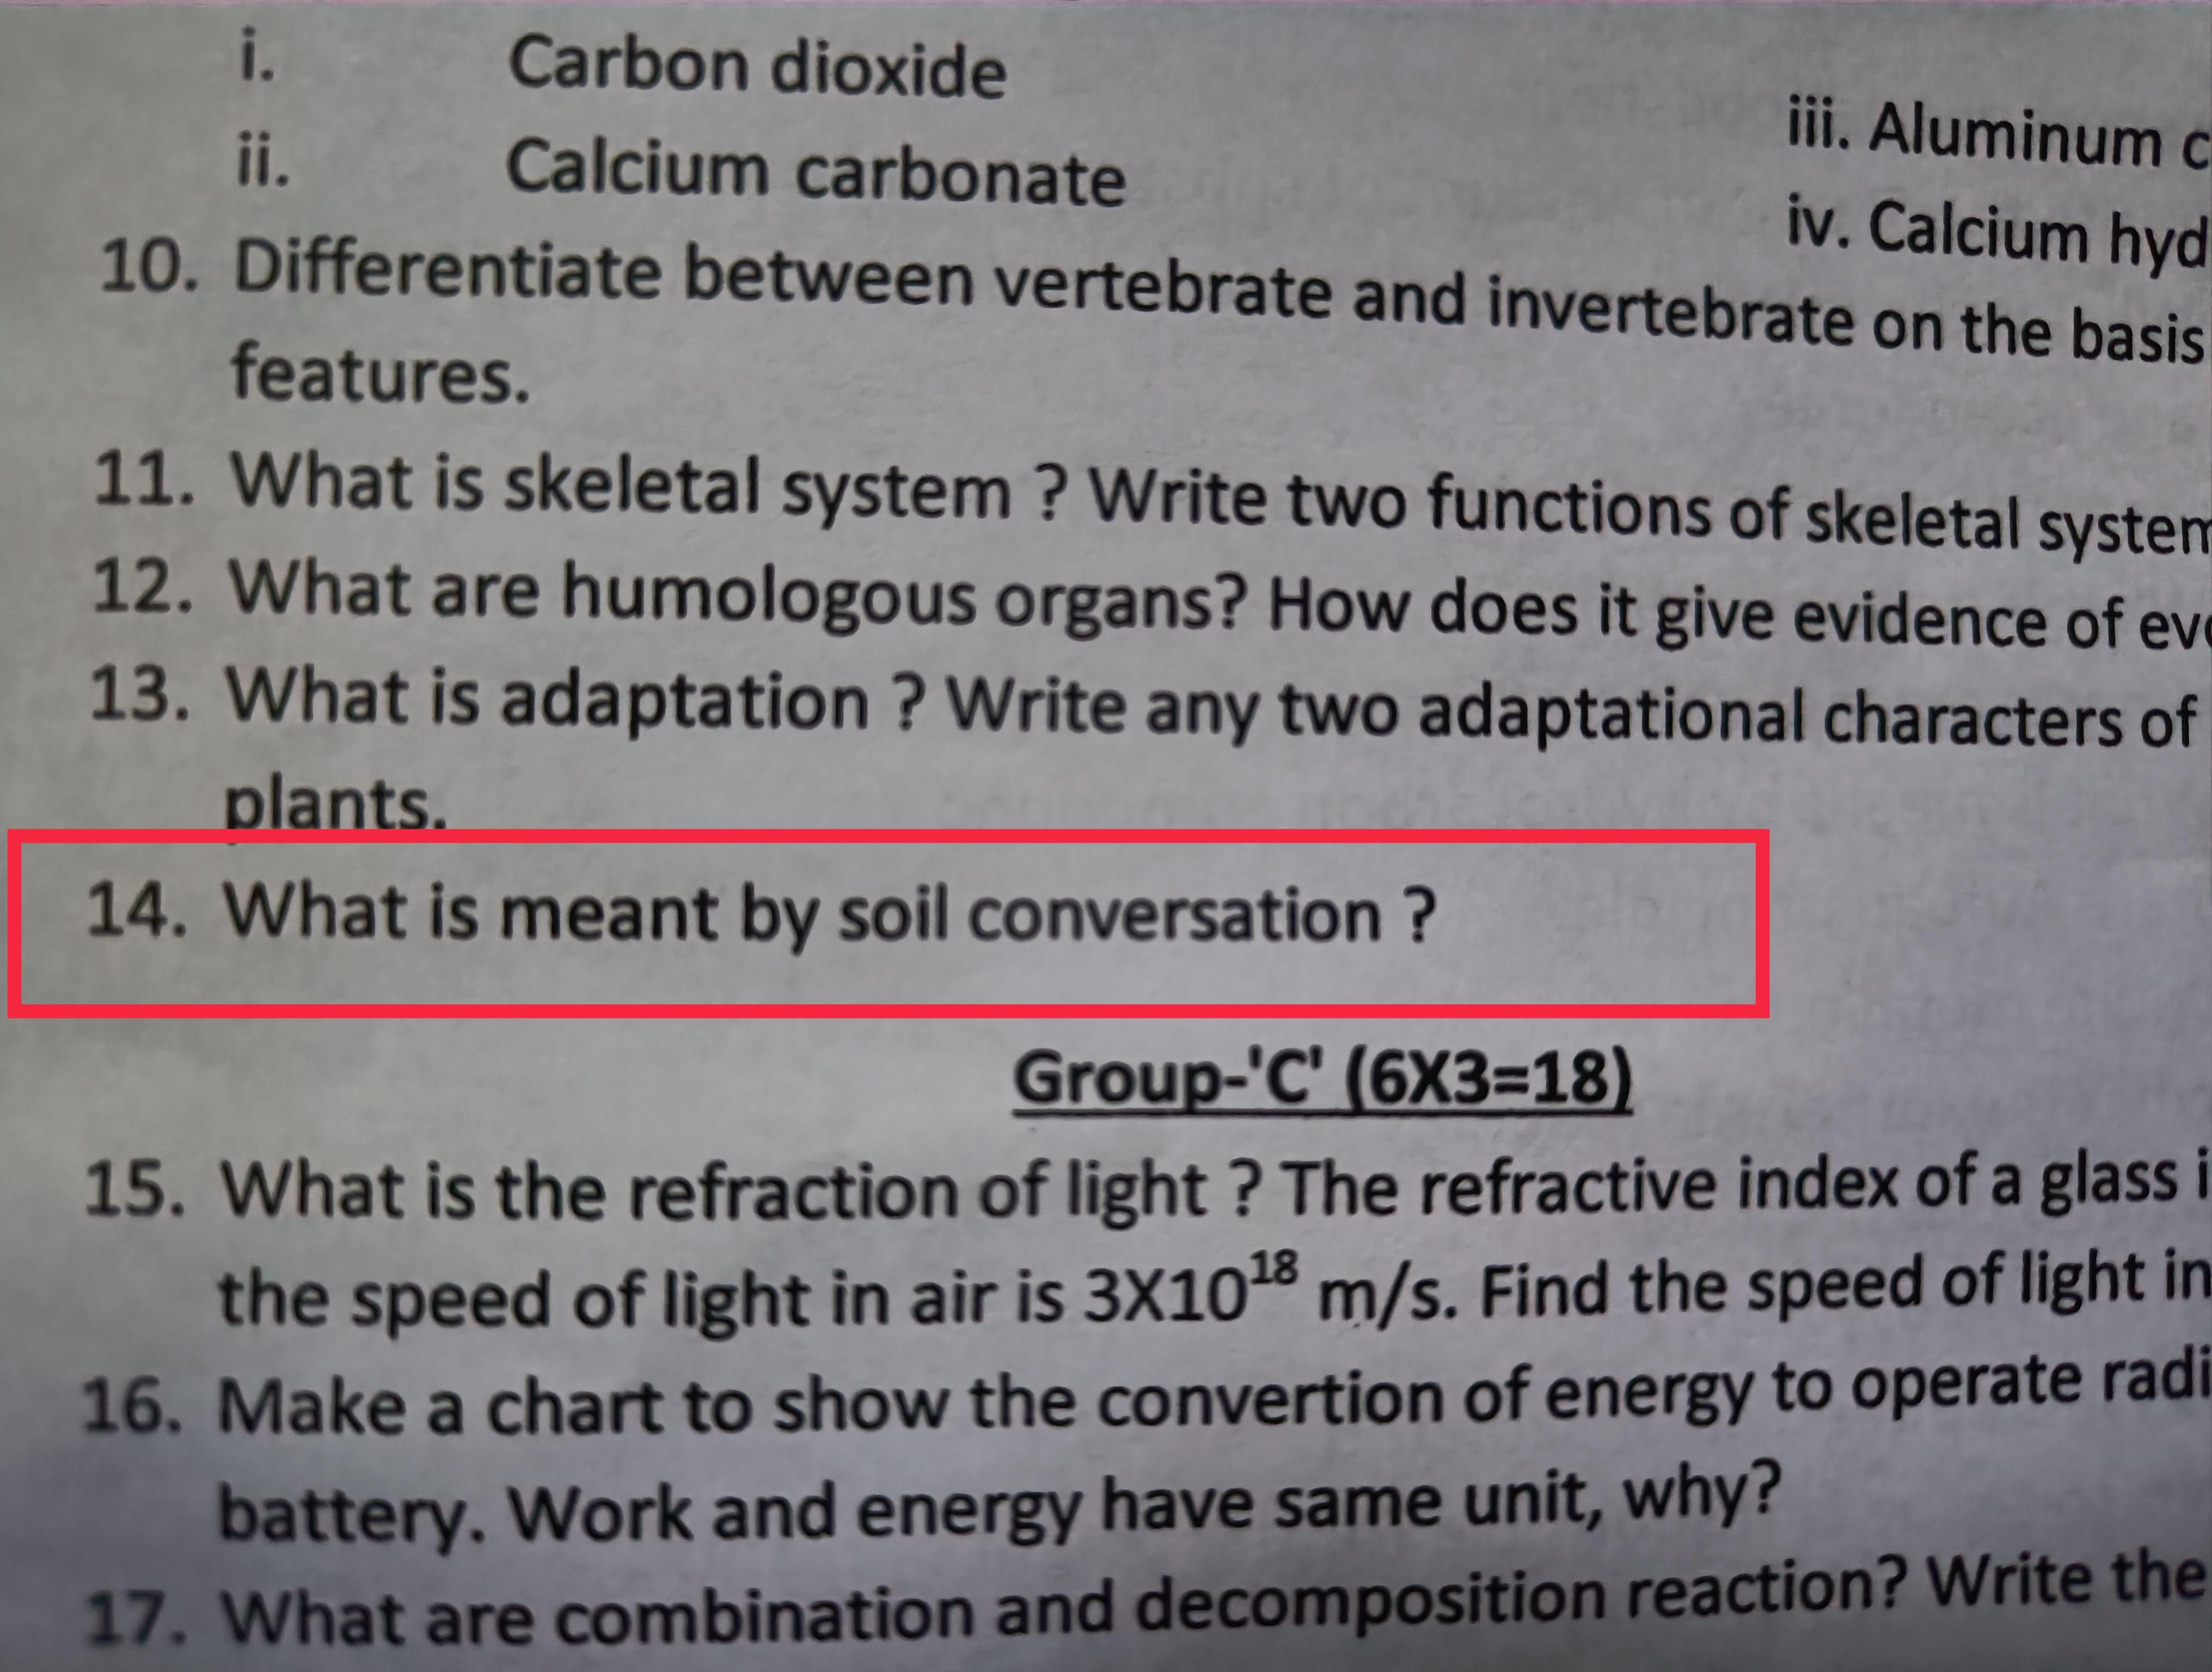 My sister's final examination question had this question. Can anyone help me?